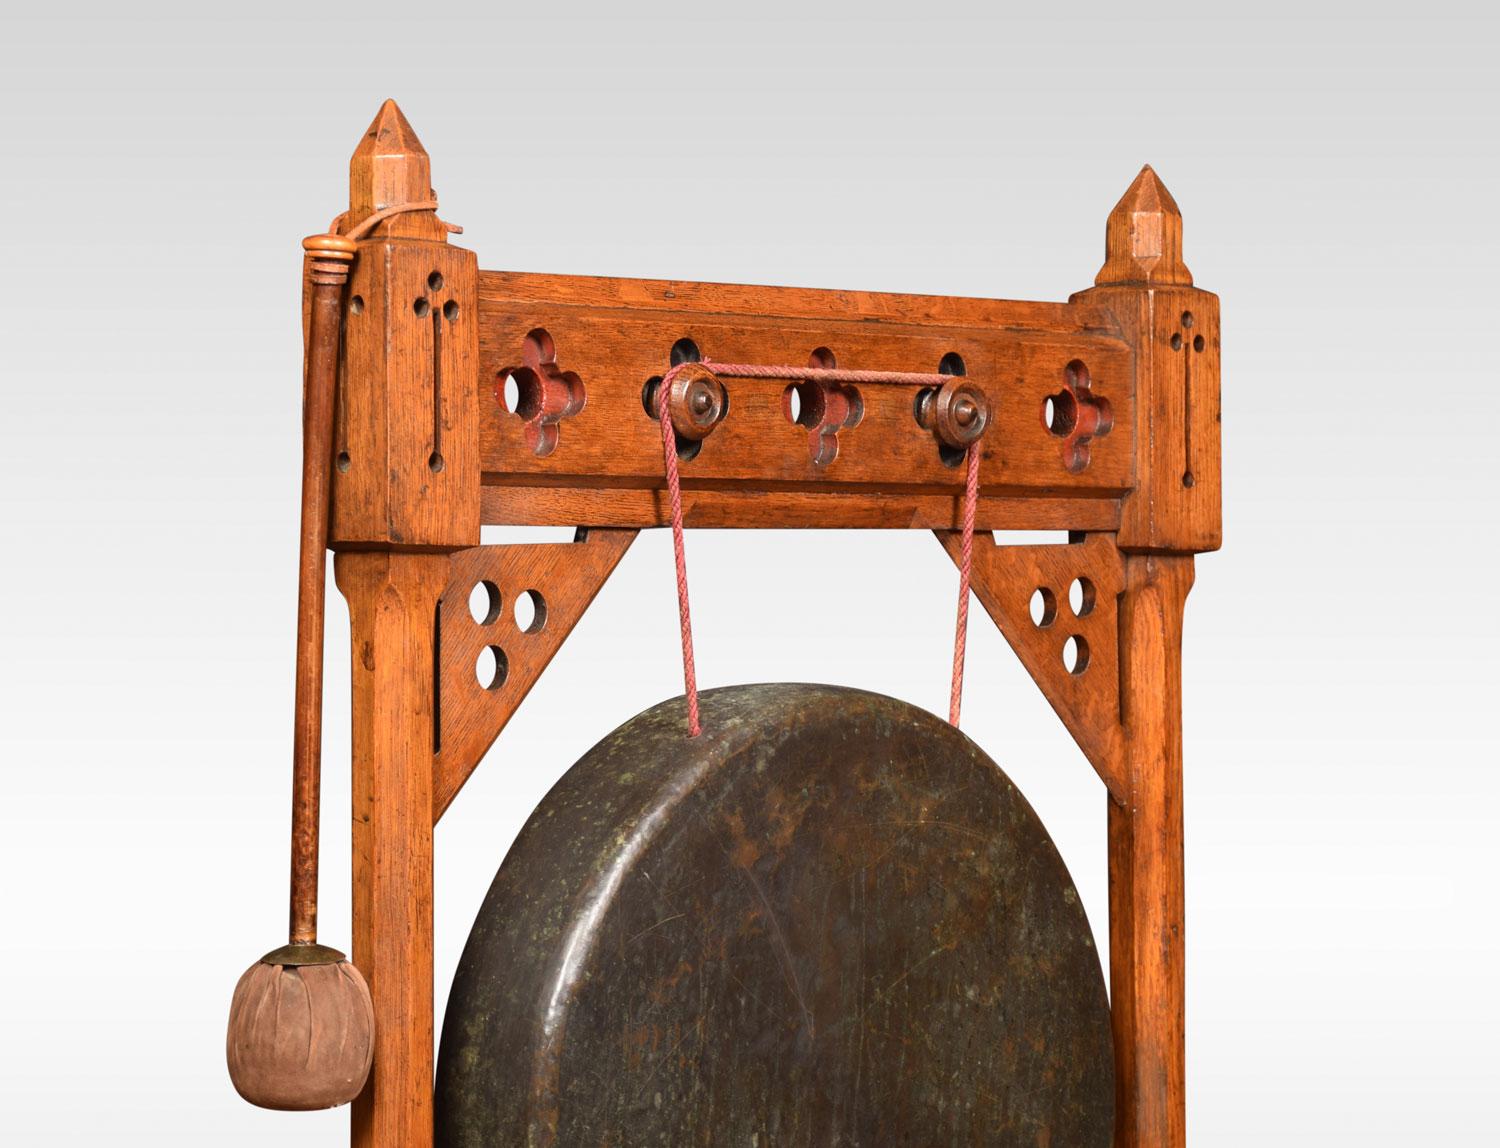 British Mid-Victorian Gothic Revival Dinner Gong